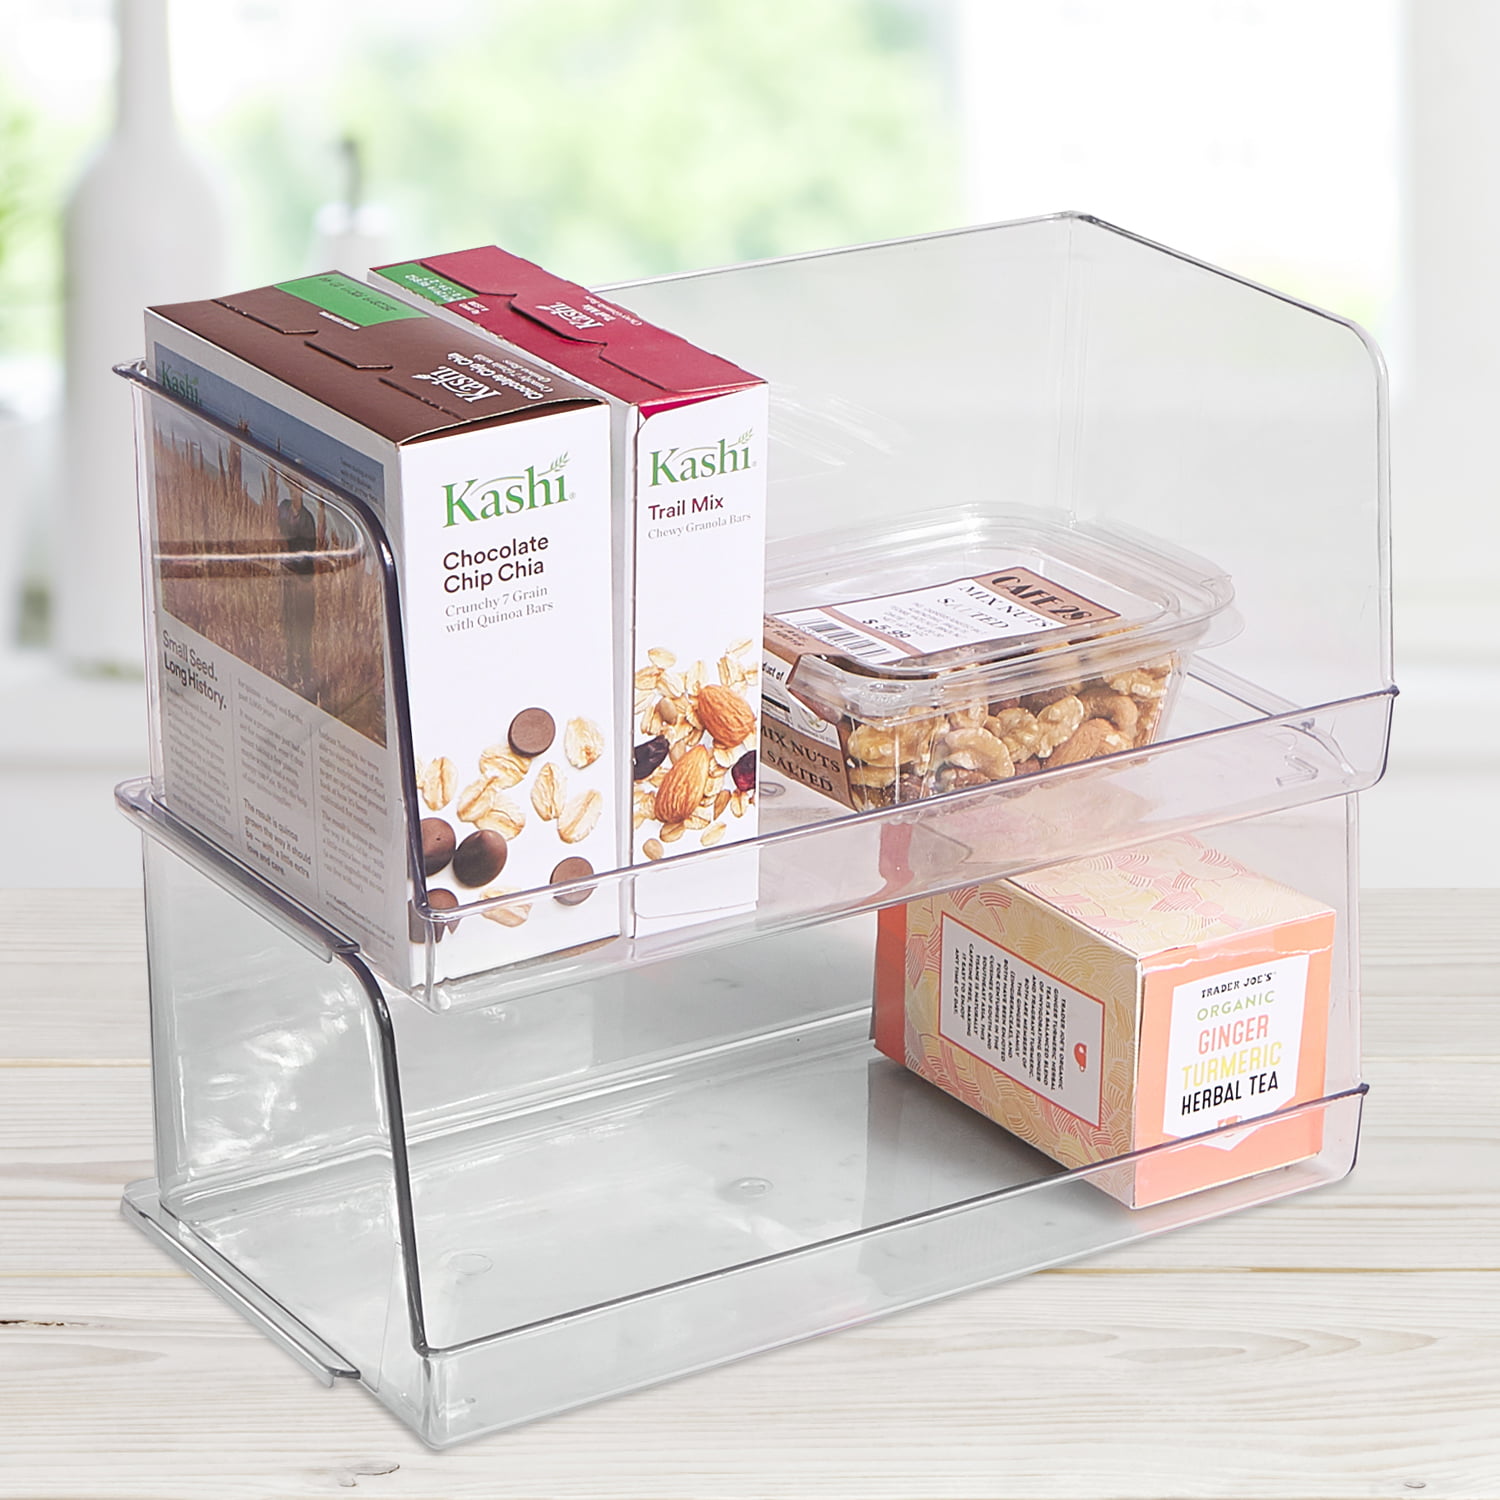 6 Pack Clear Stackable Storage Bins with Lids, Vtopmart Large